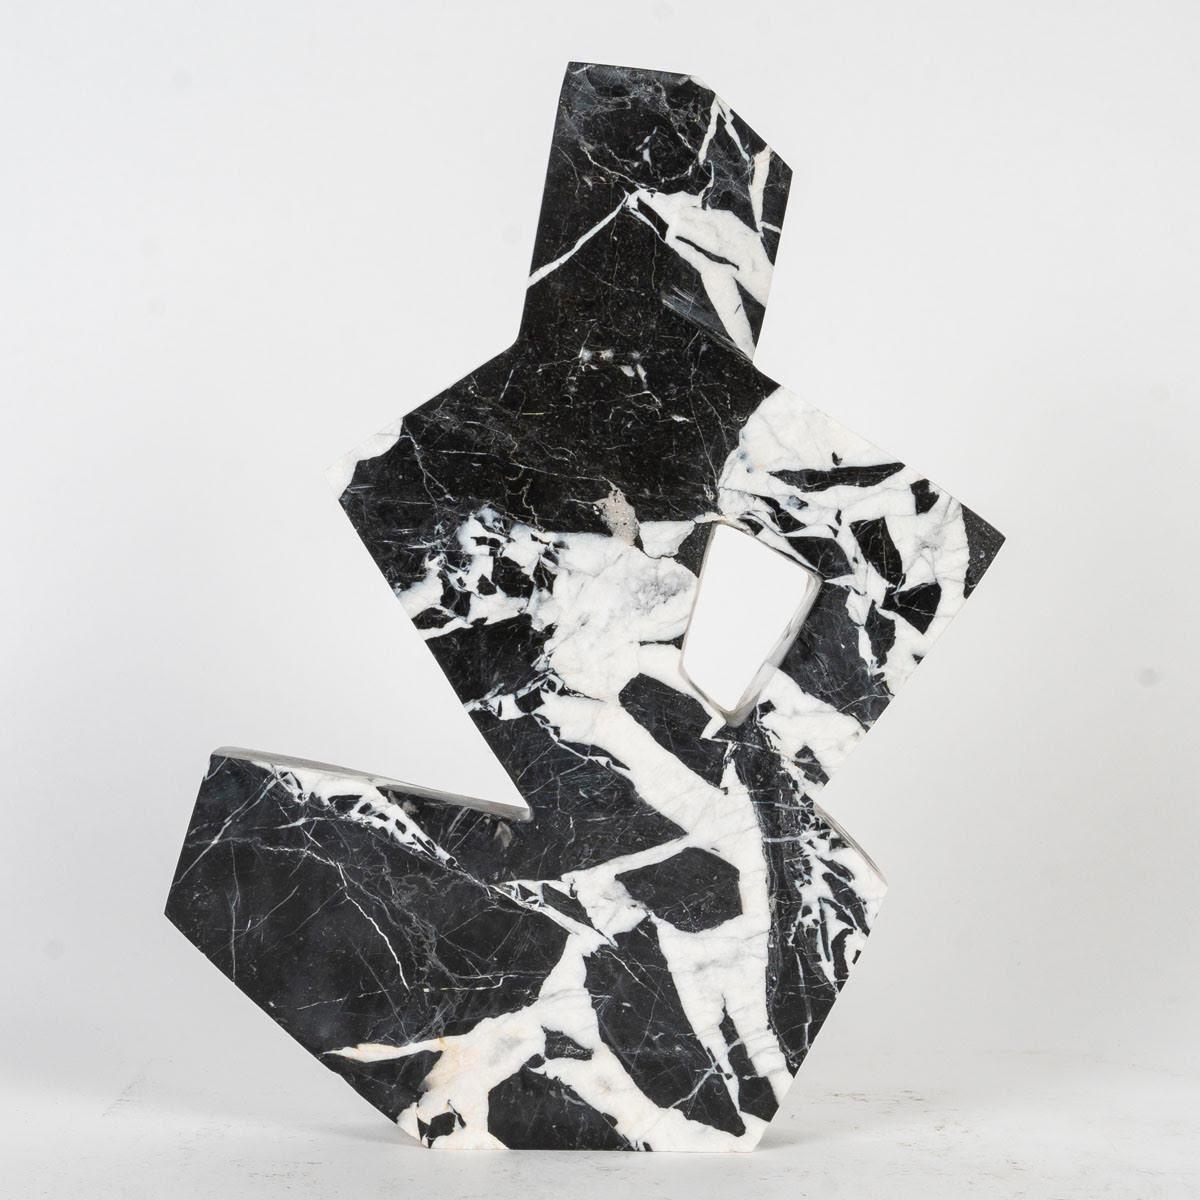 Contemporary Marble Sculpture by François Fernandez, known as SAVY, Signed and Dated 2001. For Sale